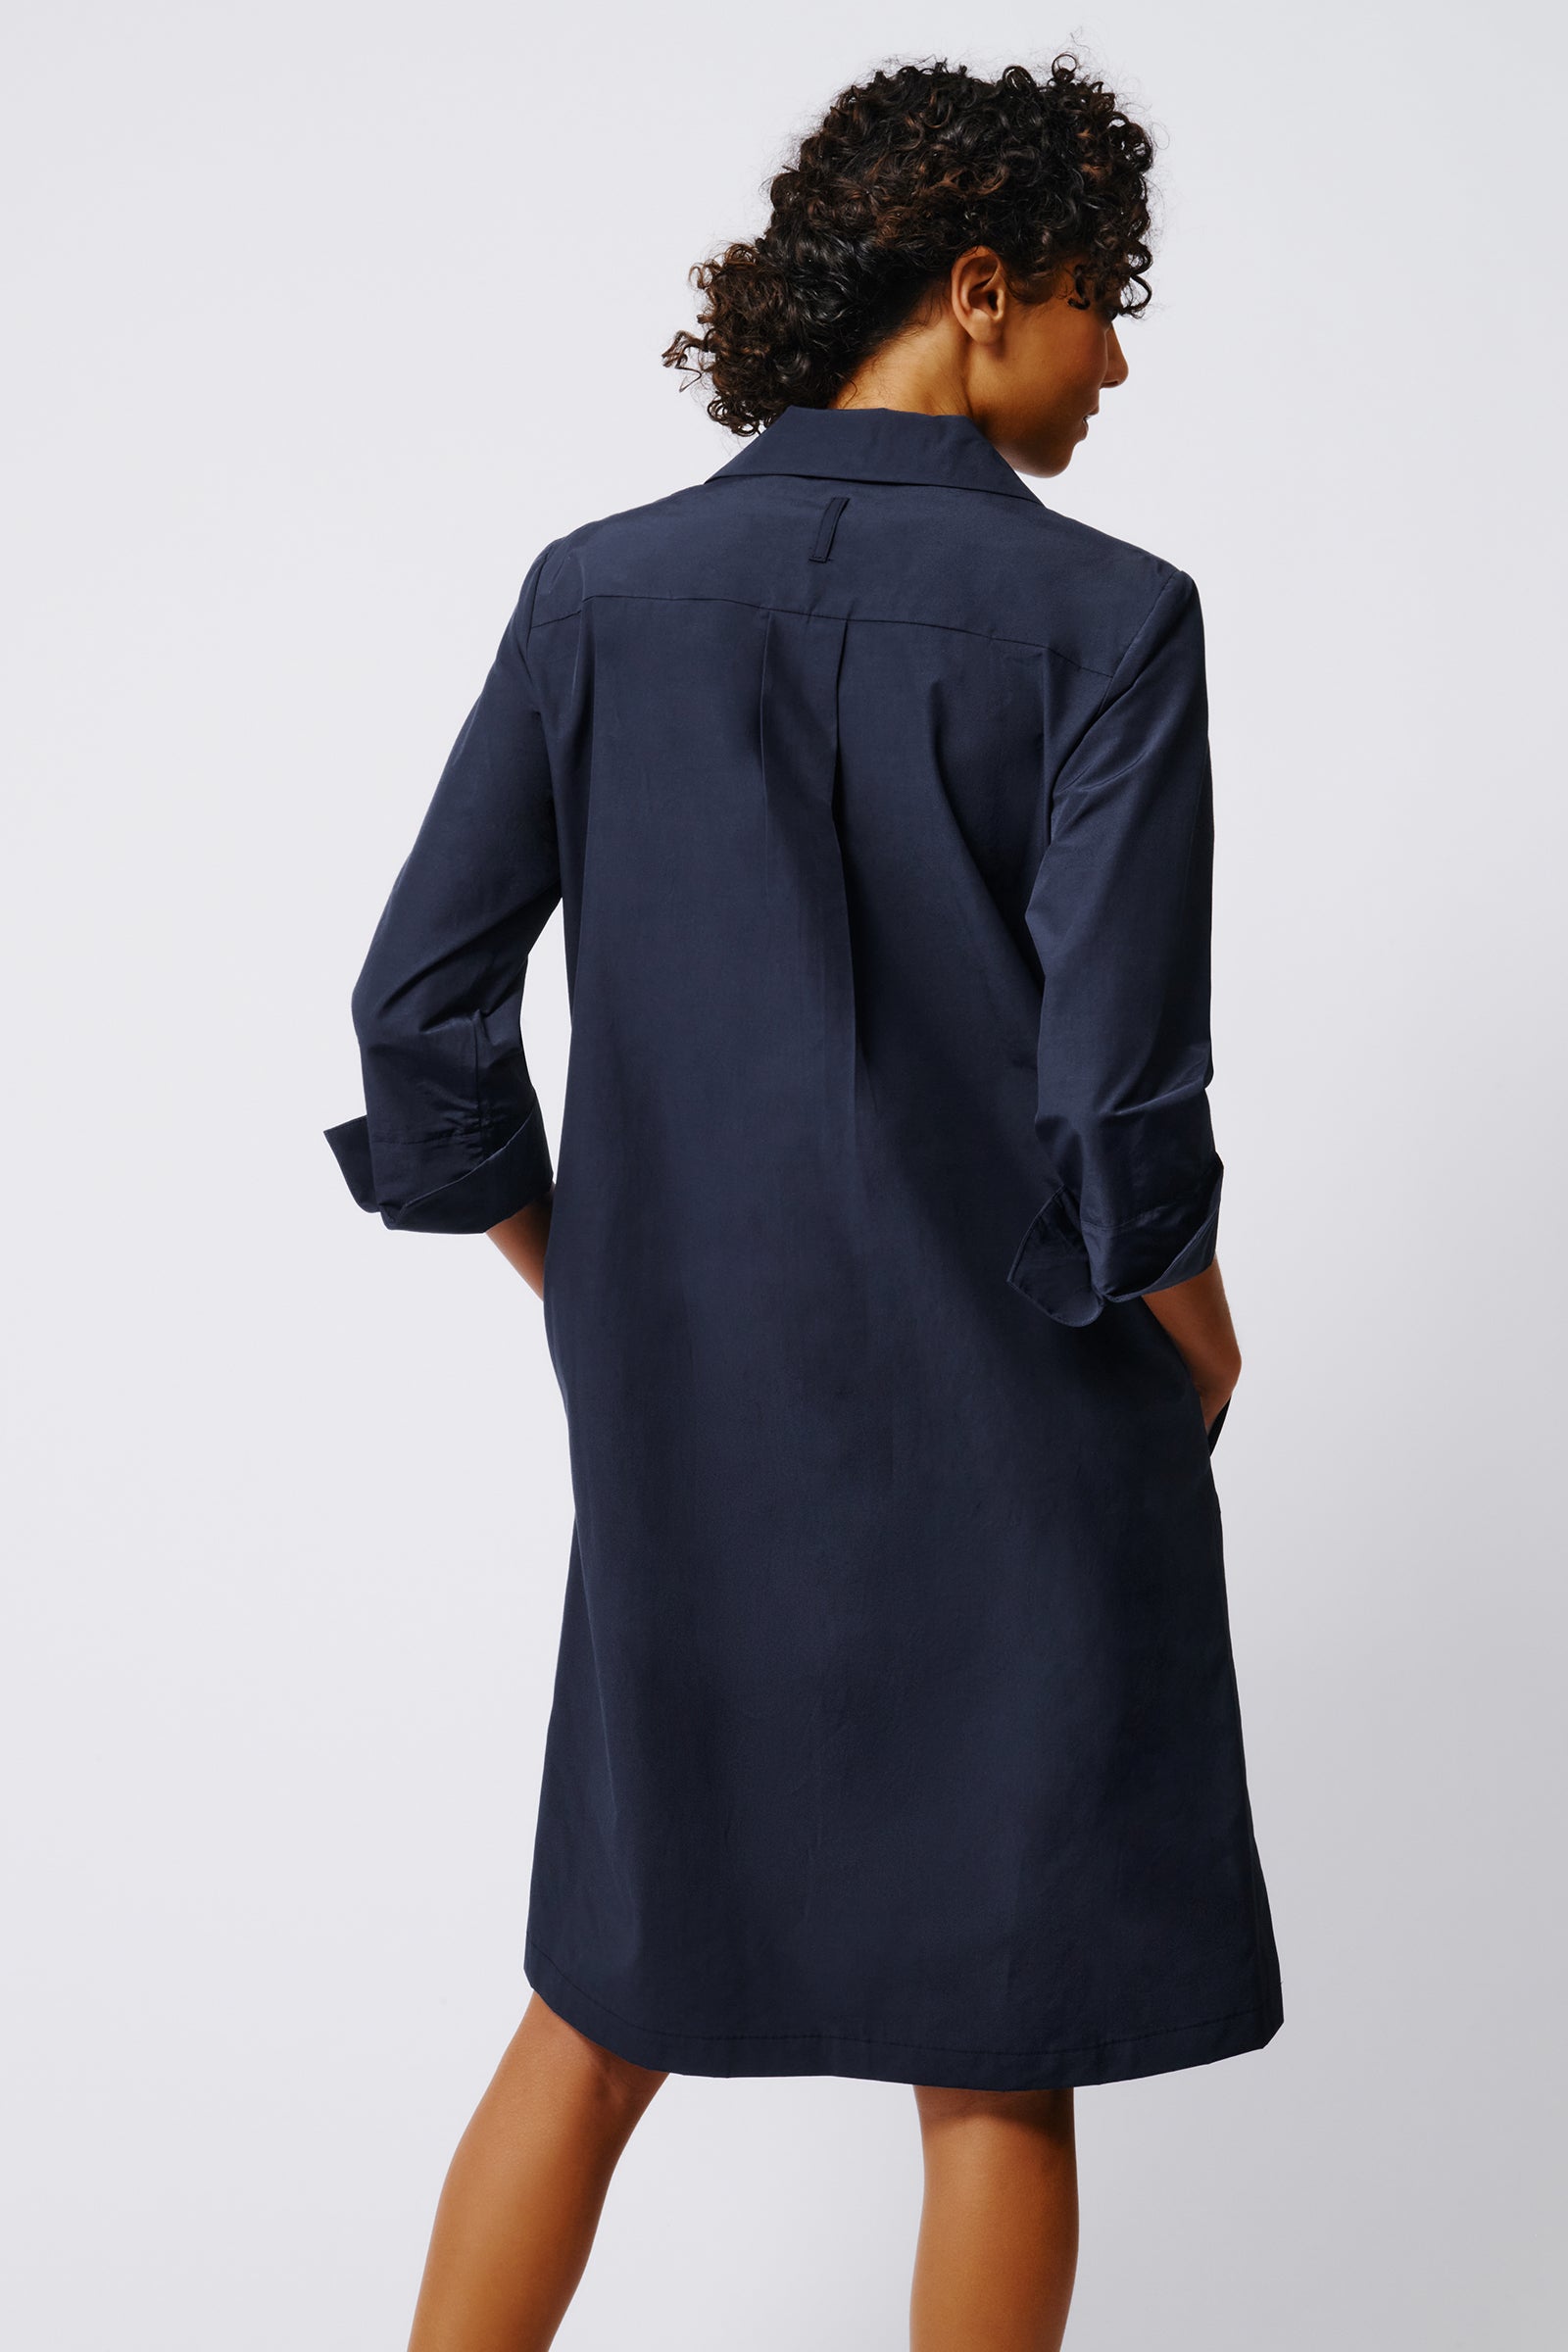 Kal Rieman Collared V Neck Dress in Navy Broadcloth on Model Back View Crop